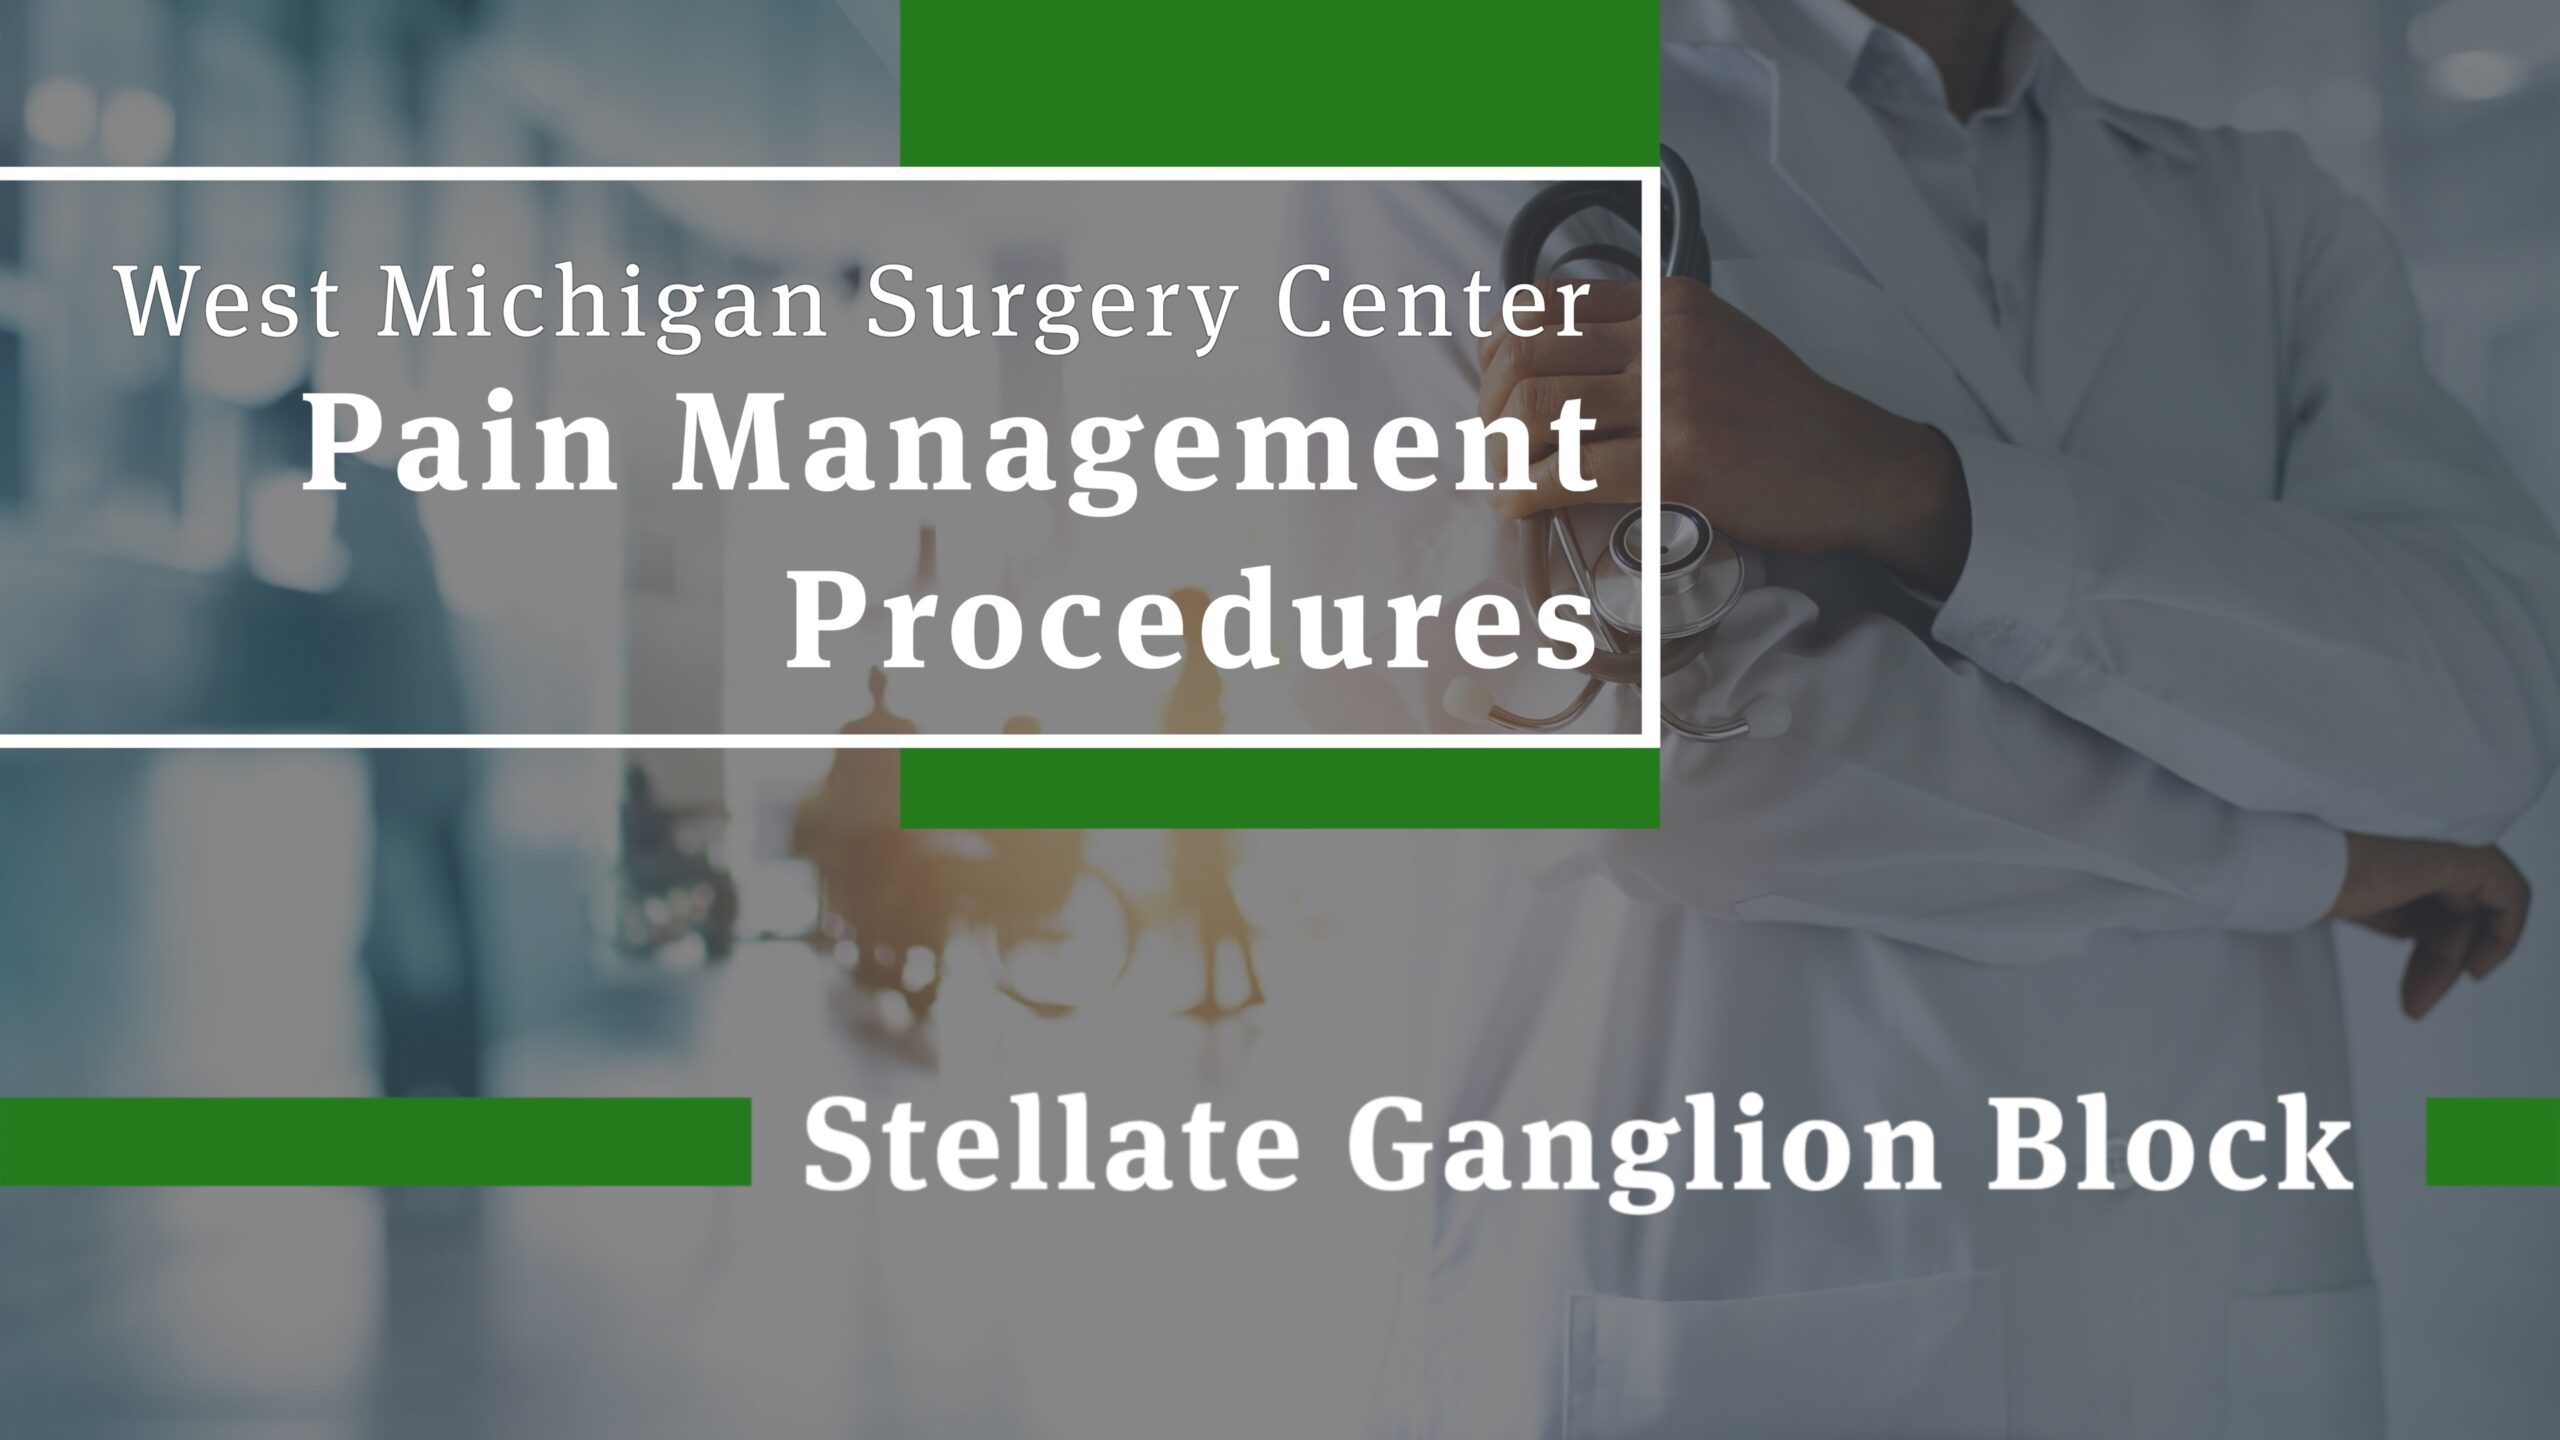 Stellate Ganglion Block for Pain